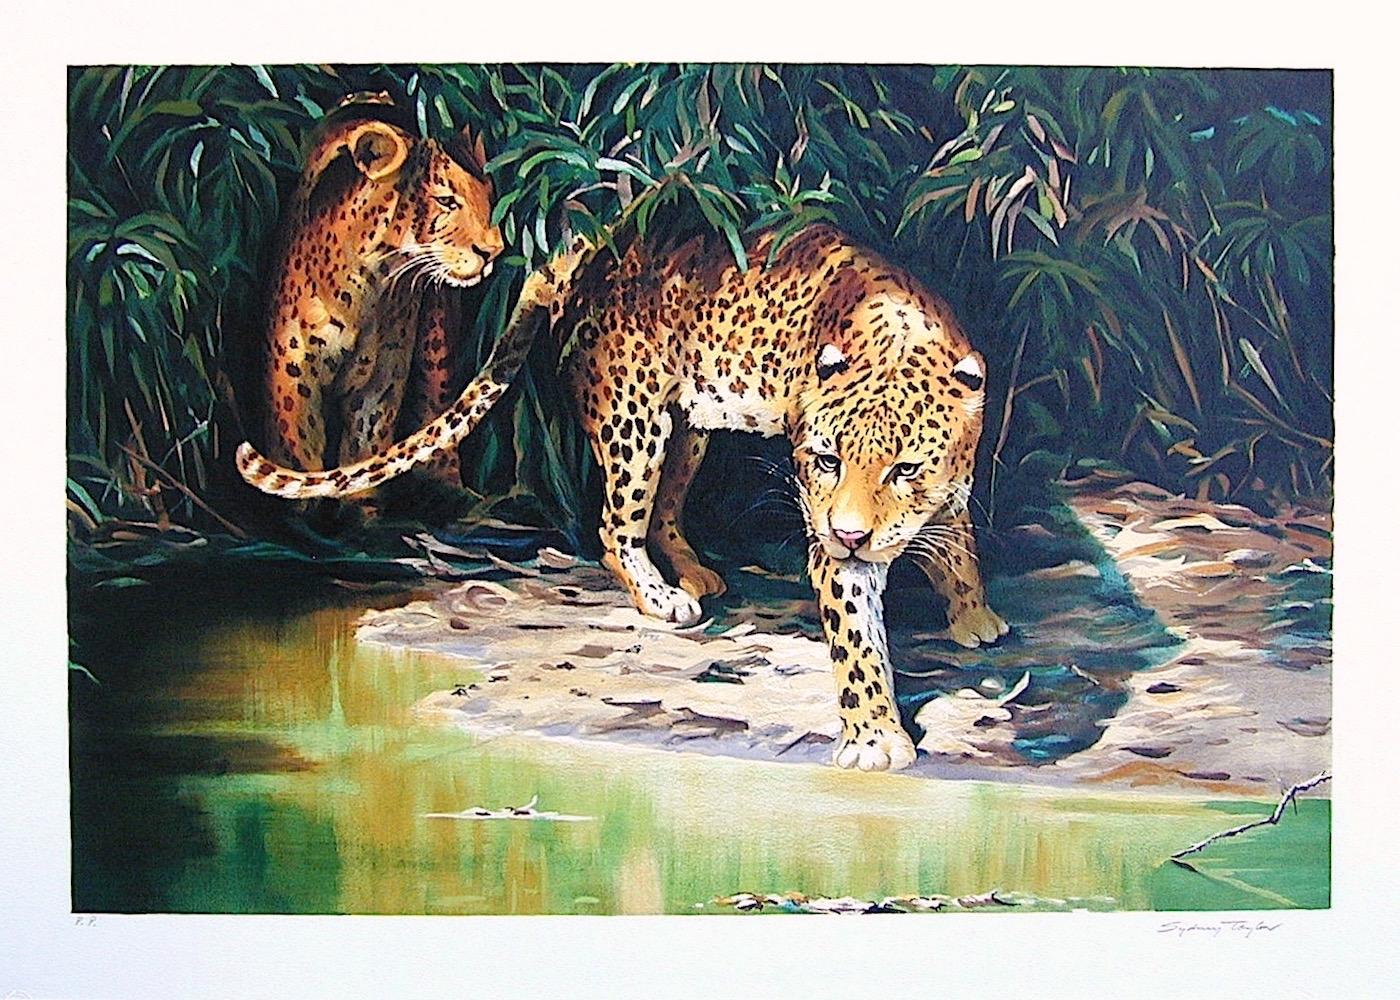 OUT OF THE SHADOWS Signed Lithograph, Leopard Portrait, Wildlife Jungle - Print by Sydney Taylor